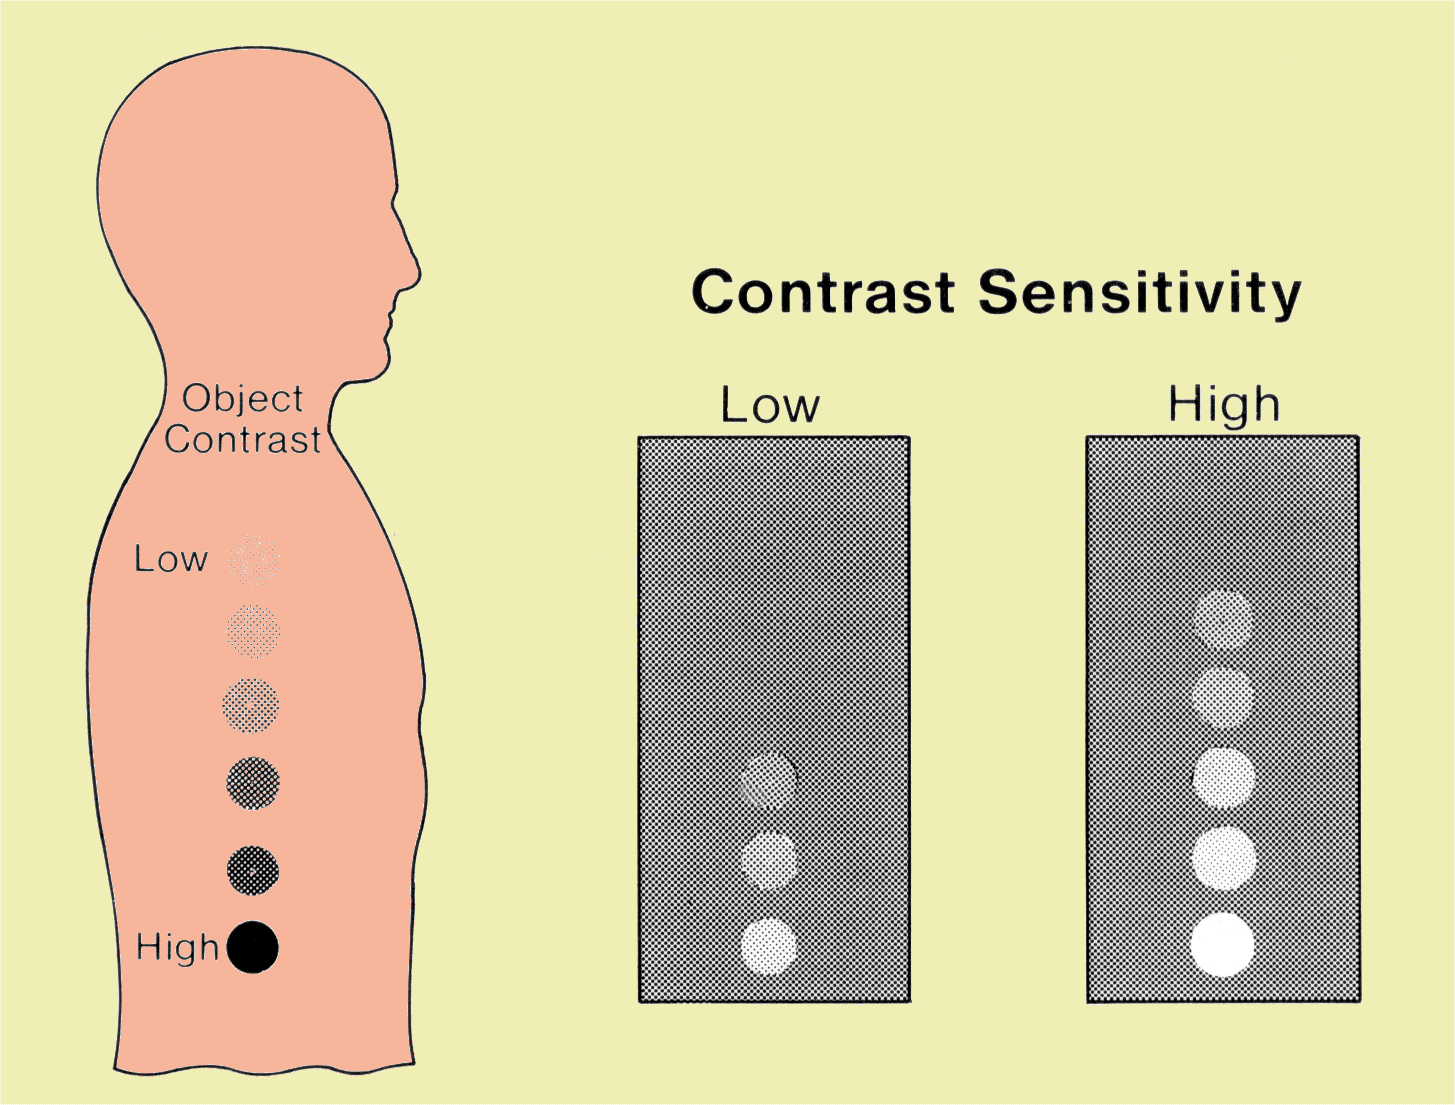 Increasing Contrast Sensitivity Increases Image Contrast and the Visibility of Objects in the Body